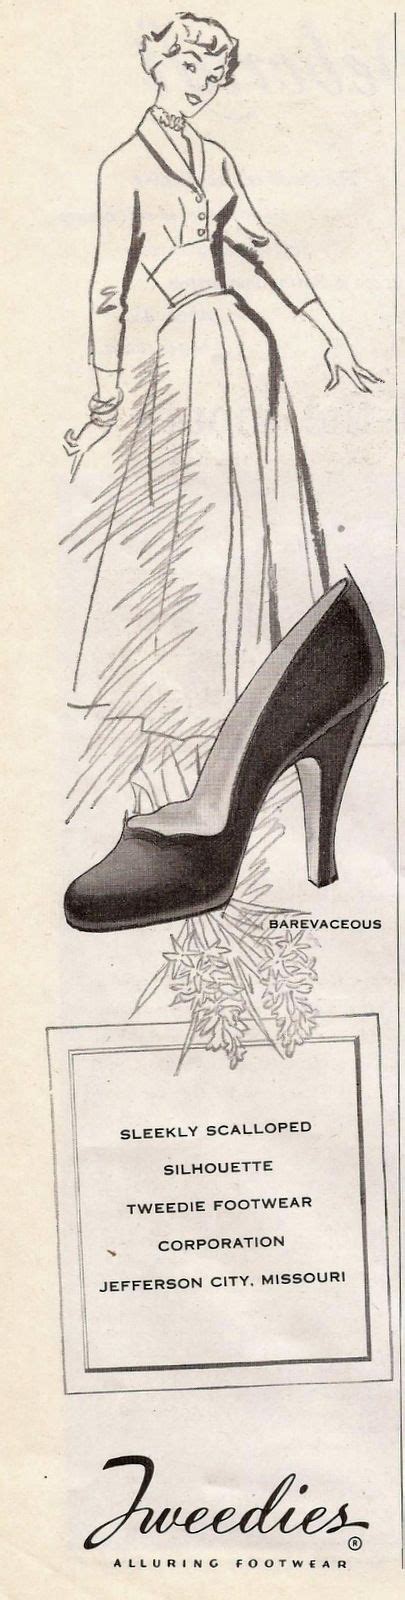 tweedies shoes ad from mademoiselle february 1949 shoes ads vintage outfits vintage